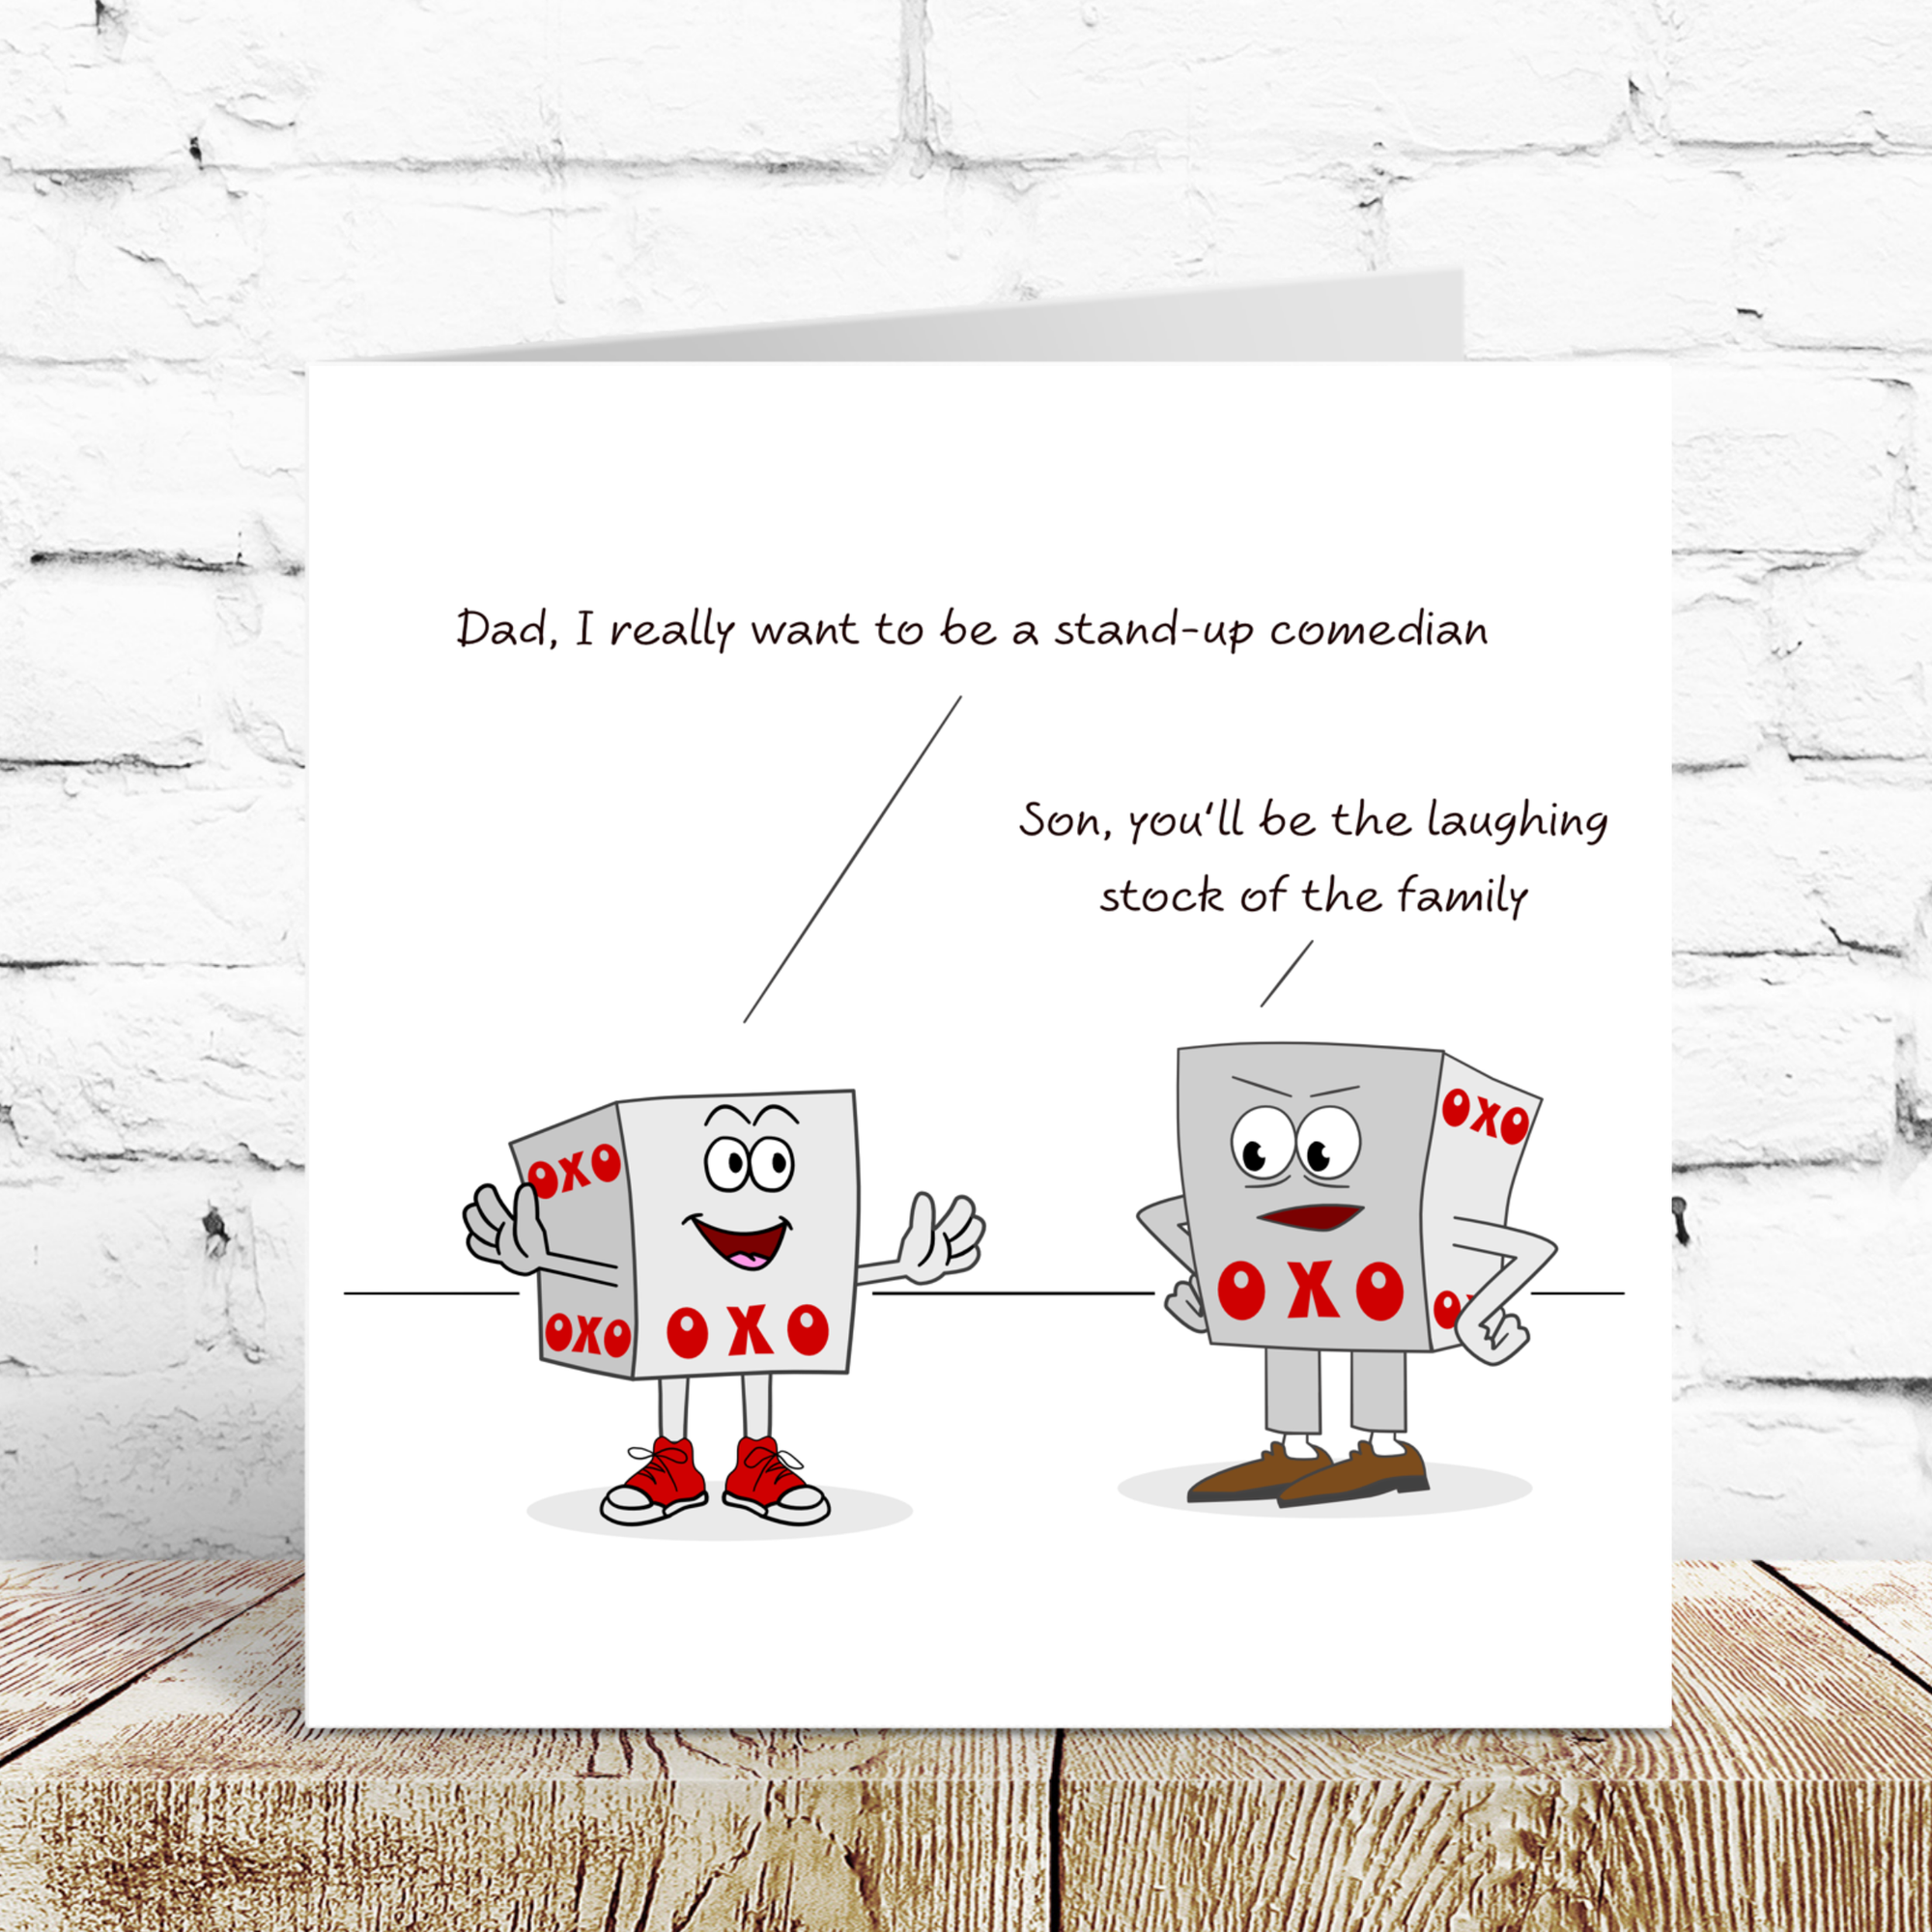 Funny Birthday Card for Son, Brother, Husband, Dad, Family or Friend. Laughing Stock Joke New Job 20 30